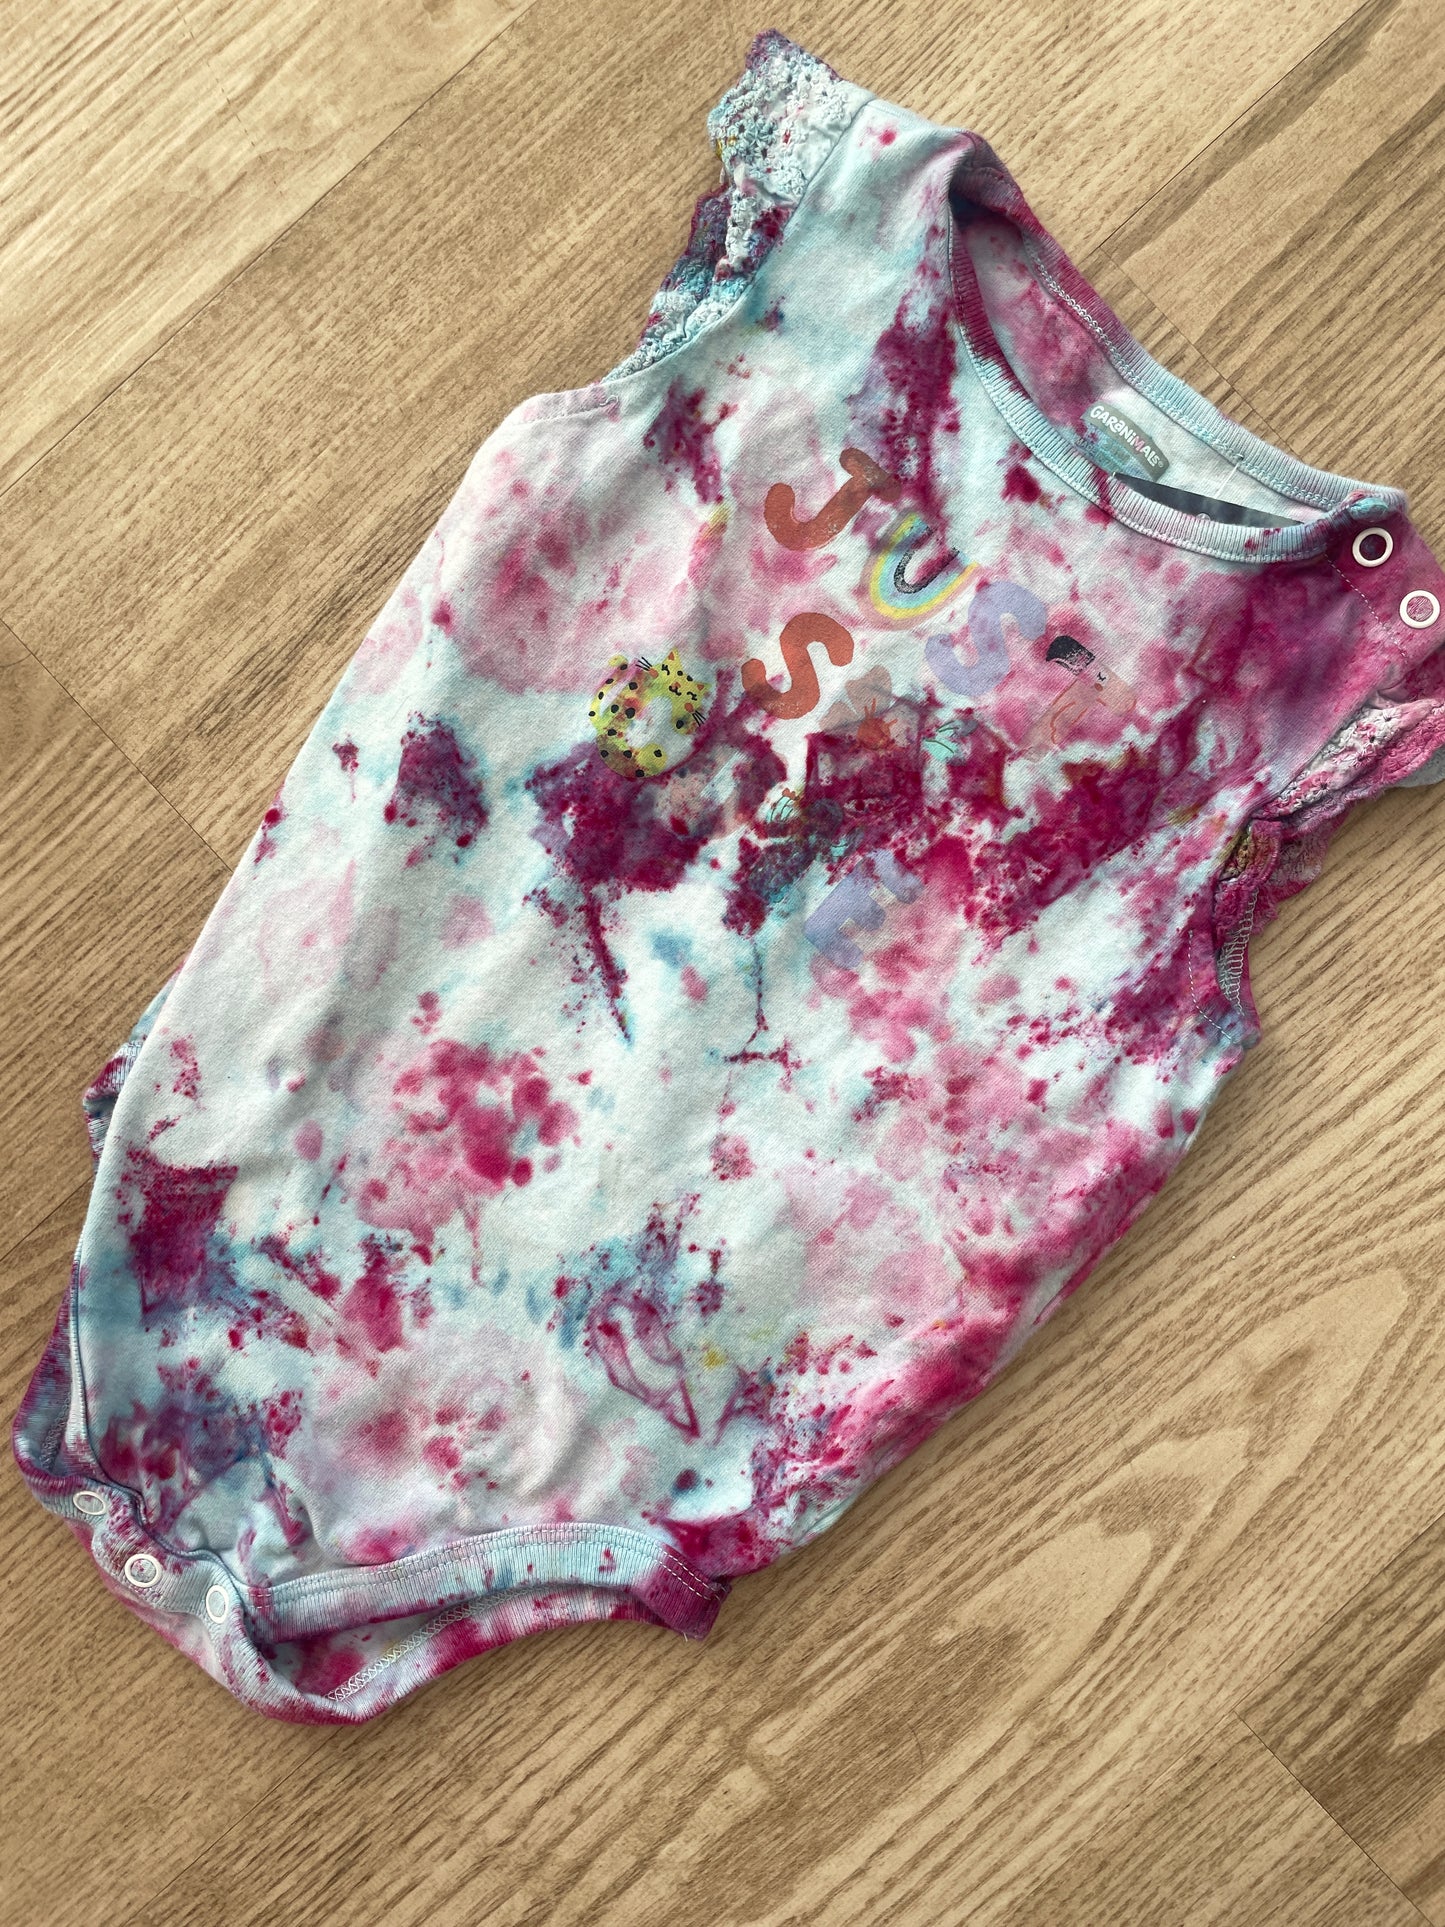 24 Months Just So Cute Short Sleeve Baby Onesie | Handmade, Upcycled Tie Dye Cotton Onesie | Galaxy Ice Dyed Blue and Pink Baby Clothing